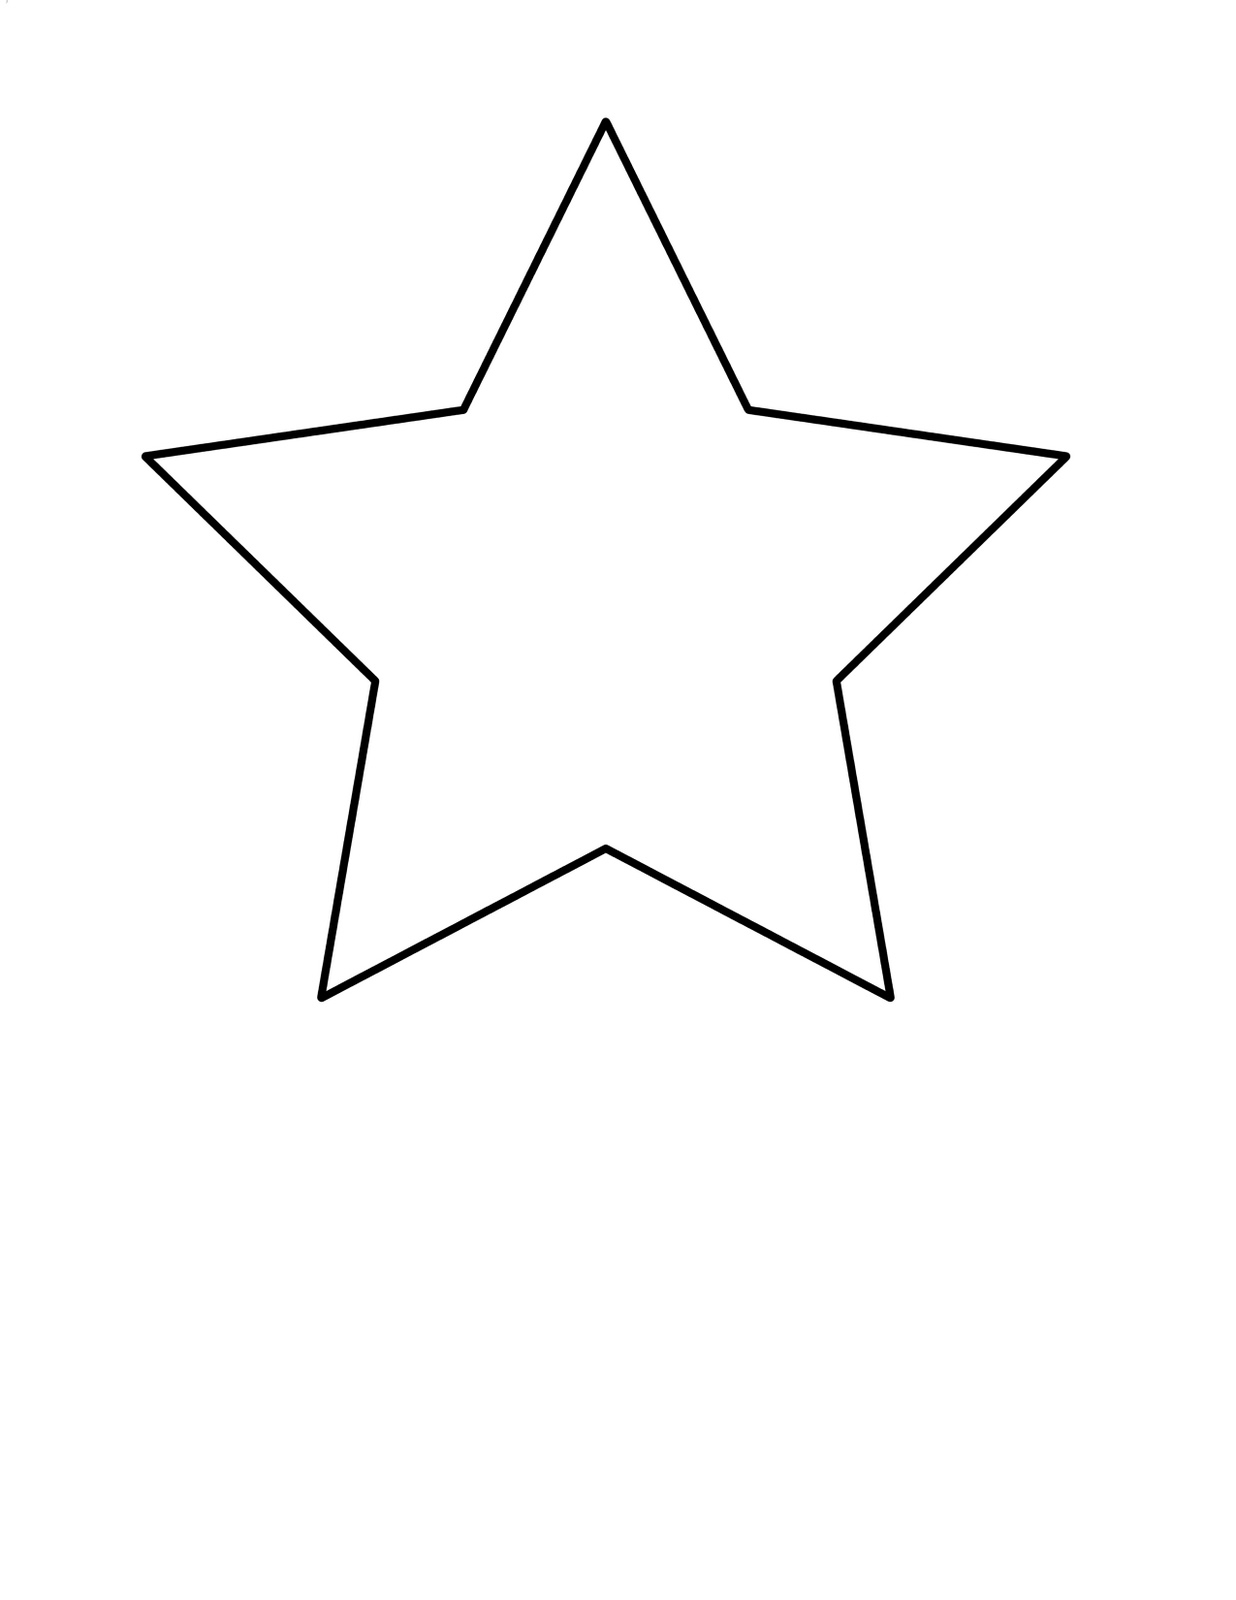 Star Simple Shapes Easy Coloring Pages For Toddlers